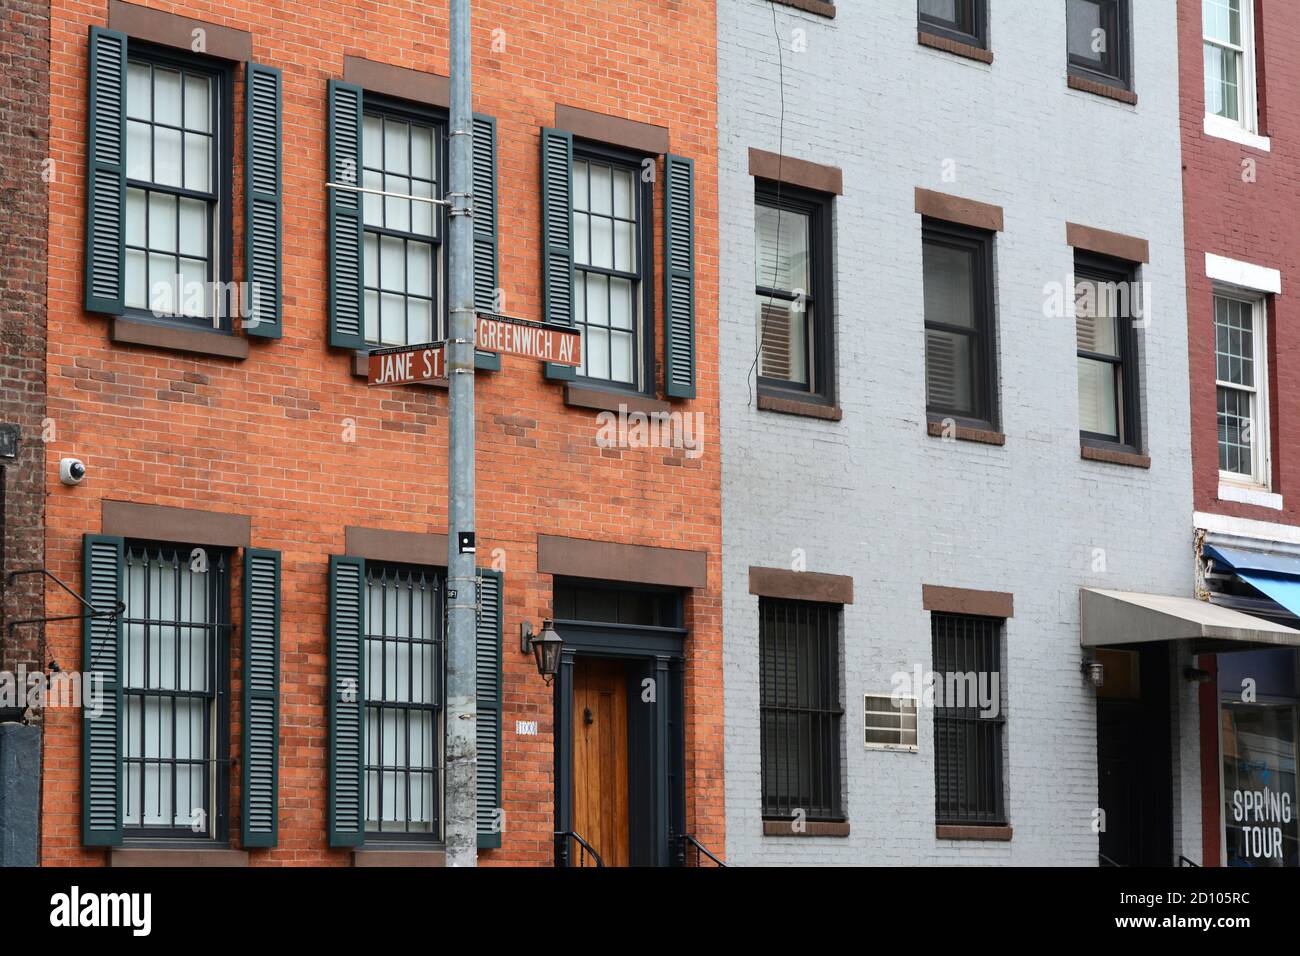 NEW YORK, USA - MAY 10, 2019: Street signs on corner of Greenwich Avenue and Jane Street in front of an attractive red brick townhouse in New York Cit Stock Photo